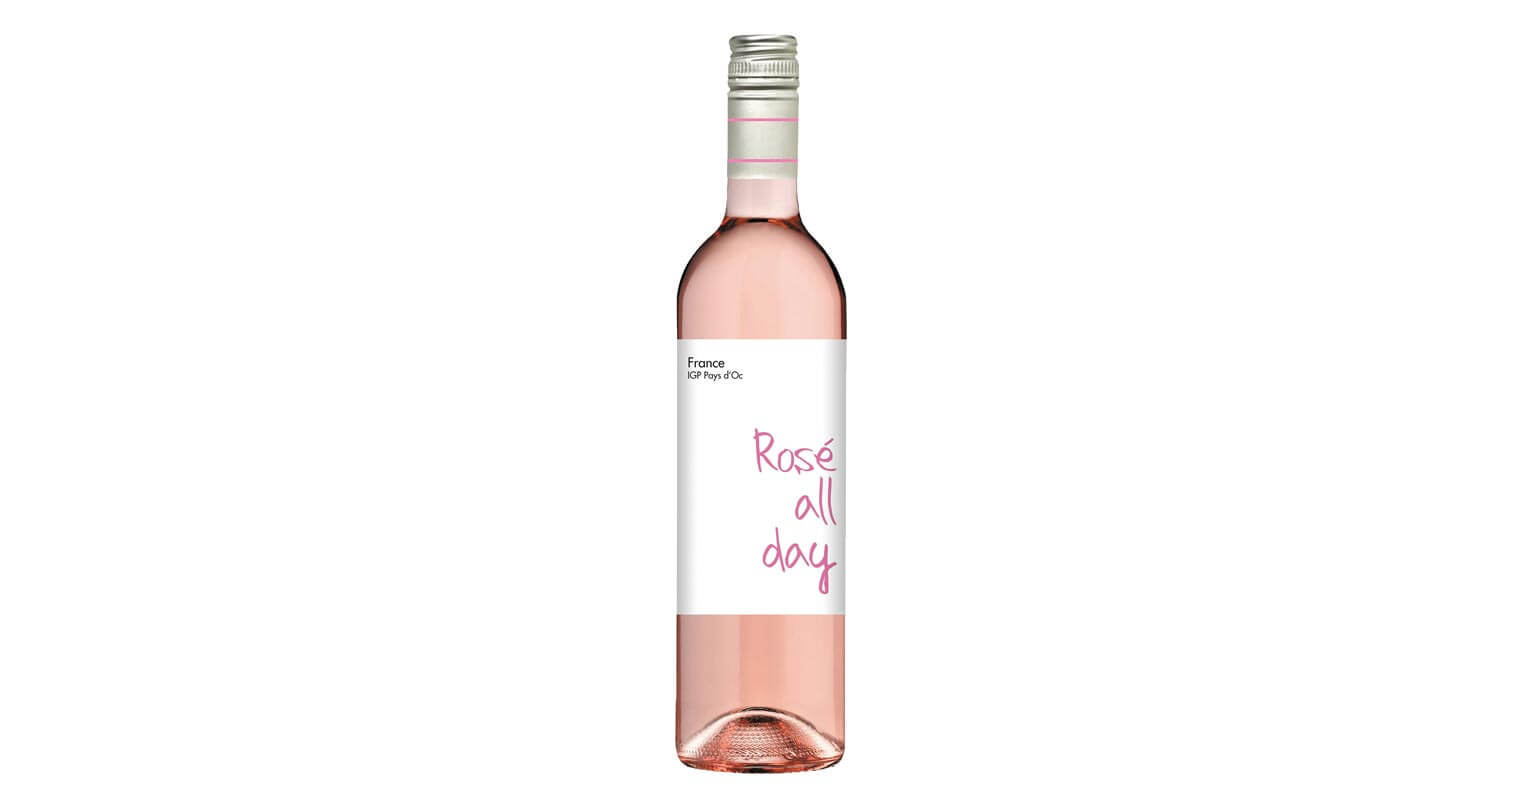 Rosé All Day Wine Launches, featured image